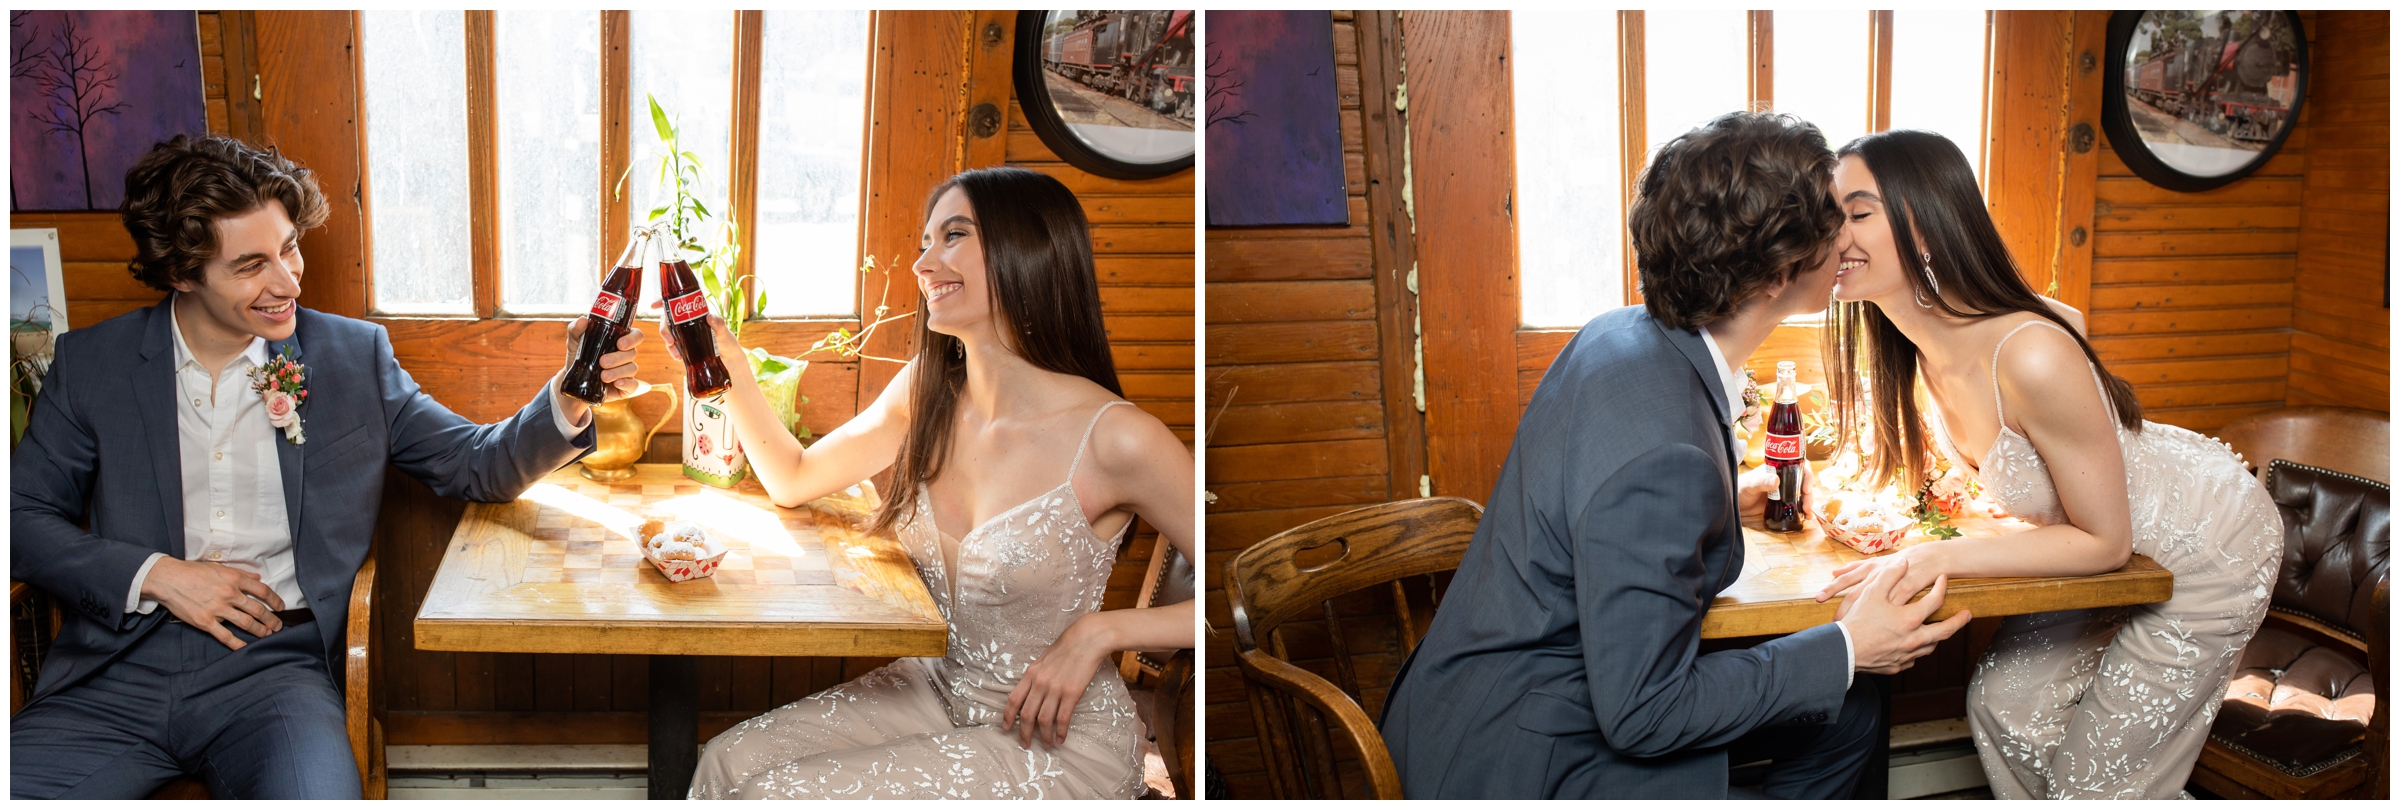 couple toasting bottles of coca cola during unique elopement in a Colorado train car